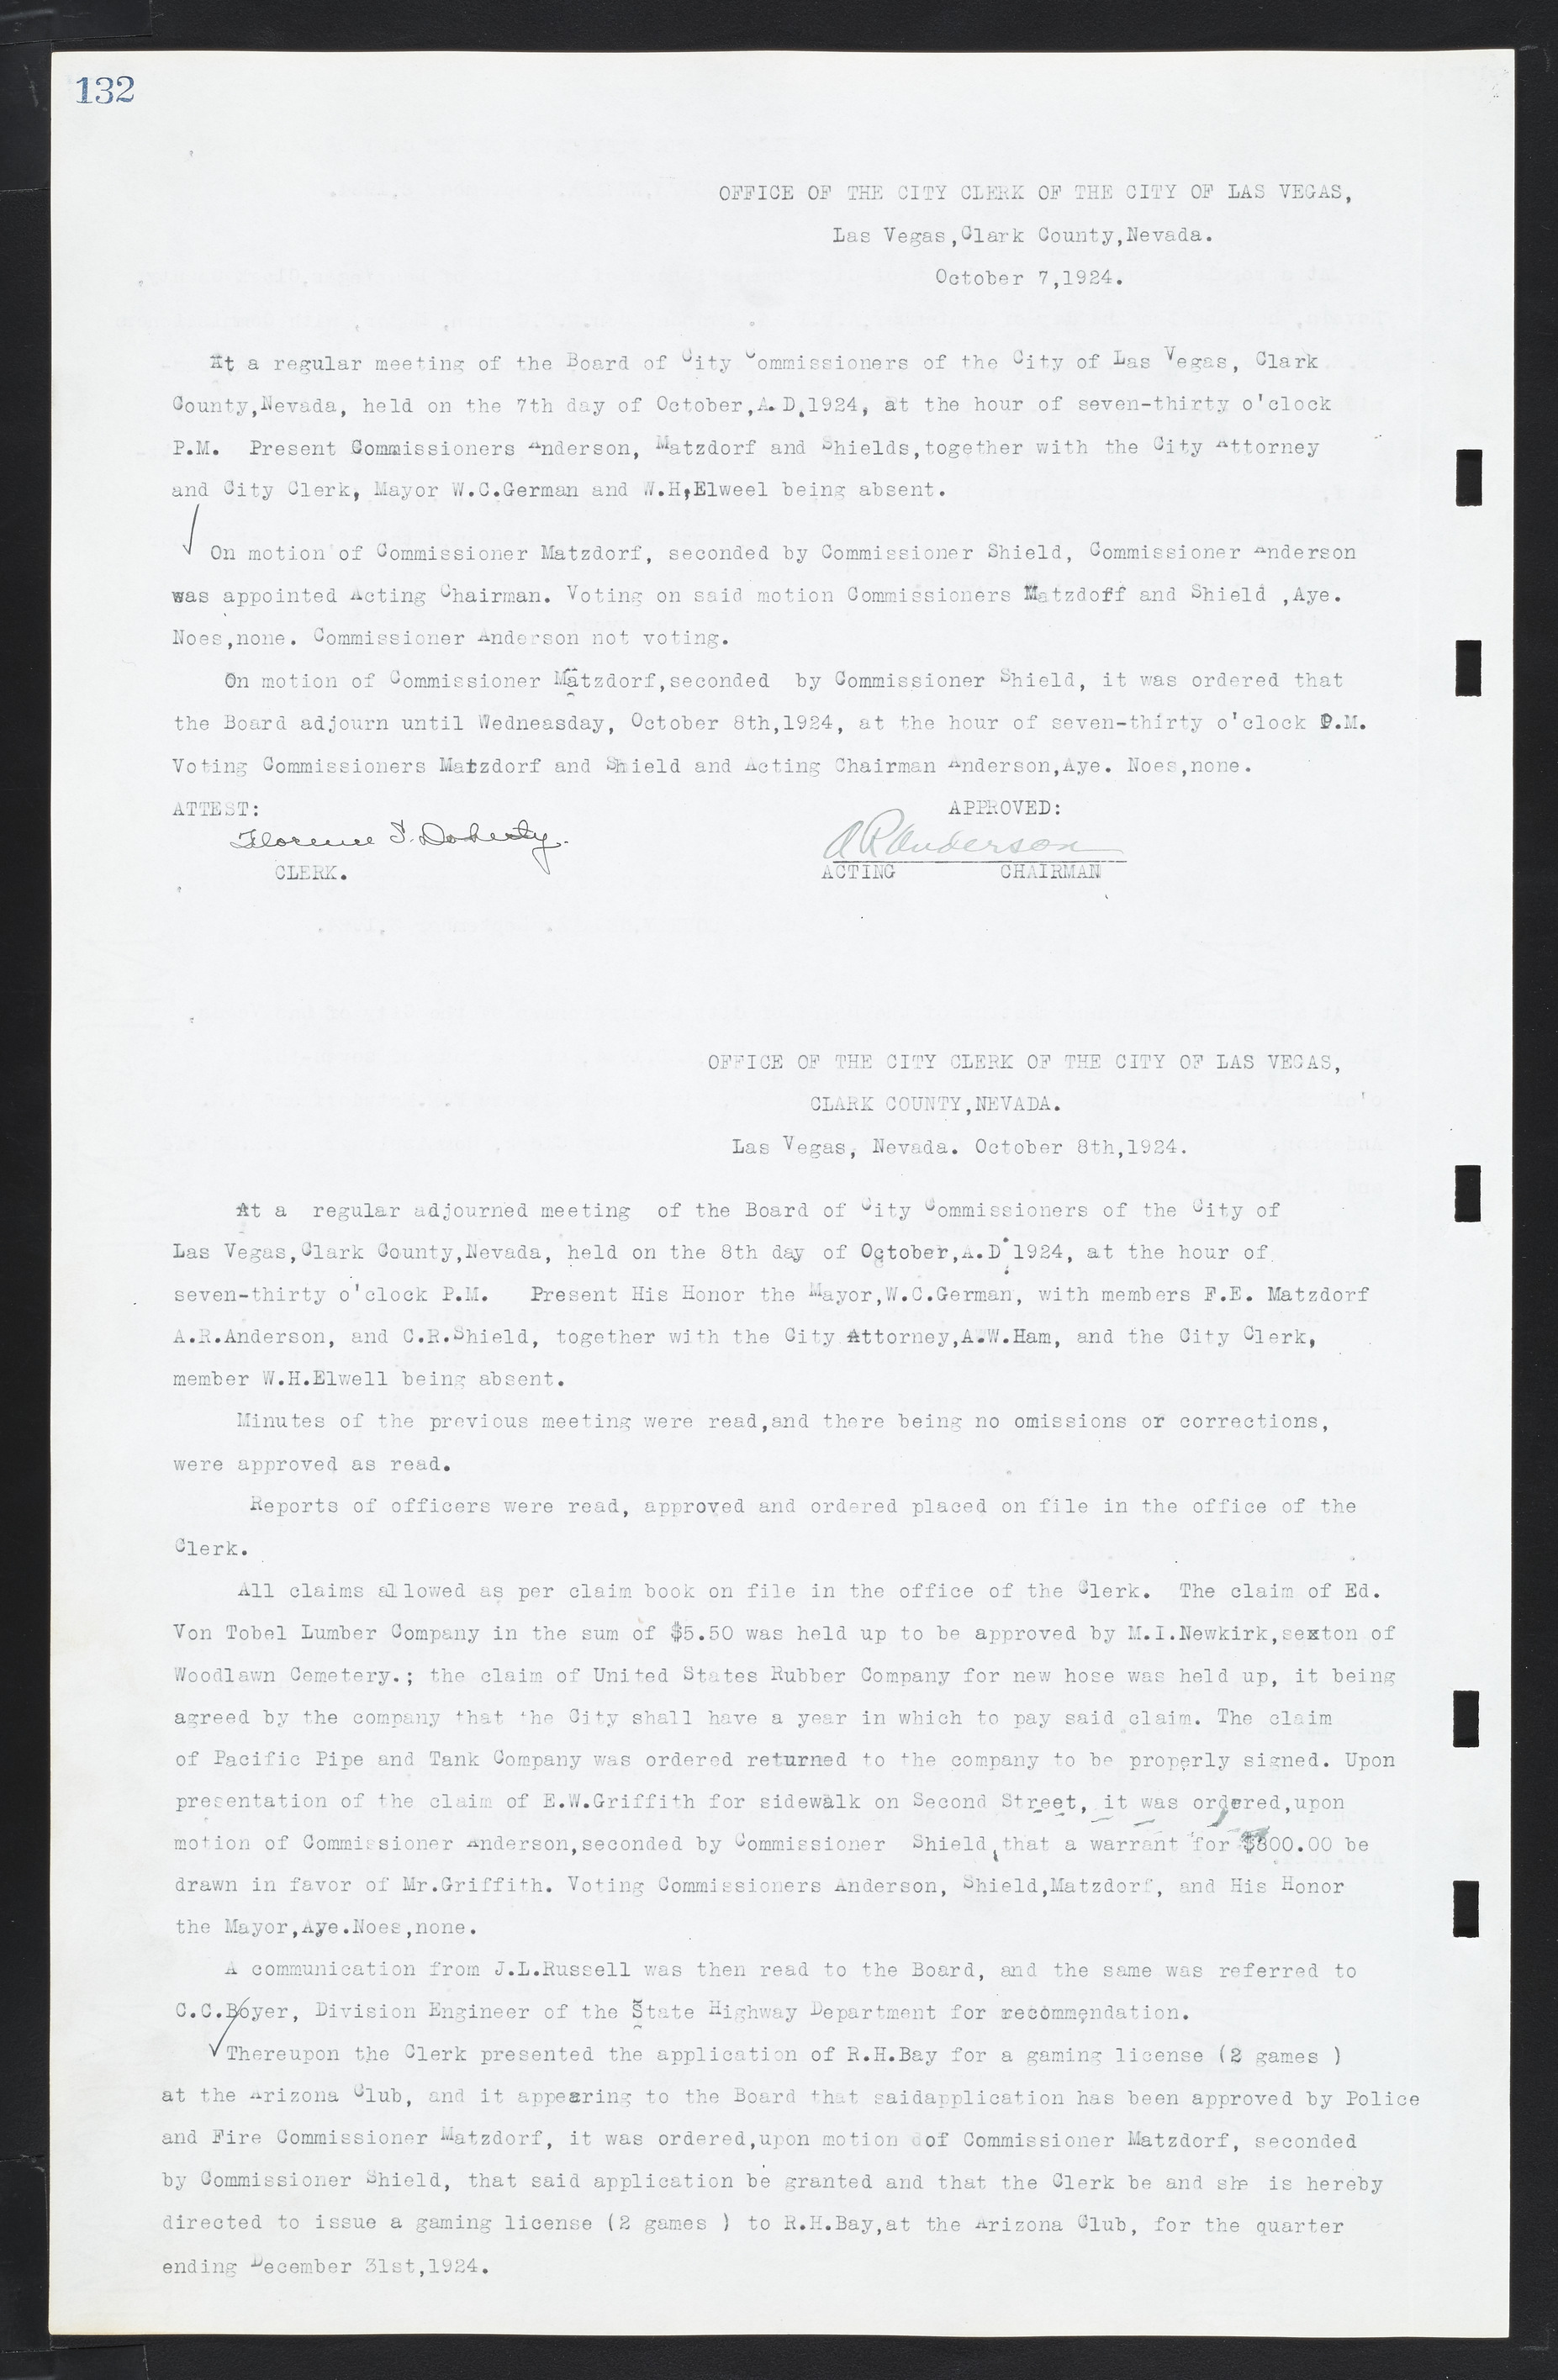 Las Vegas City Commission Minutes, March 1, 1922 to May 10, 1929, lvc000002-139